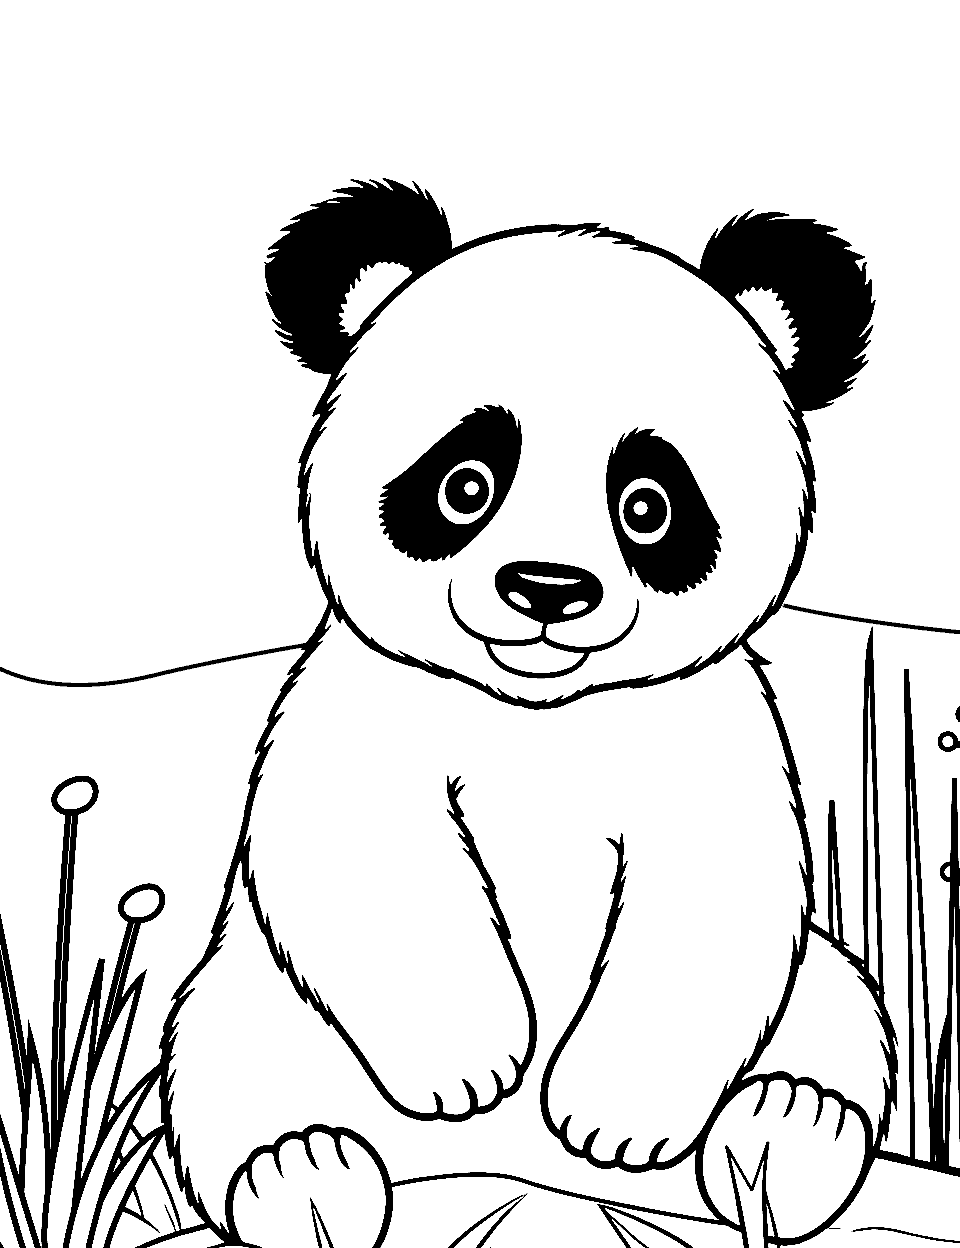 Panda Adventure Coloring Page - A panda exploring a serene meadow with a curious expression.